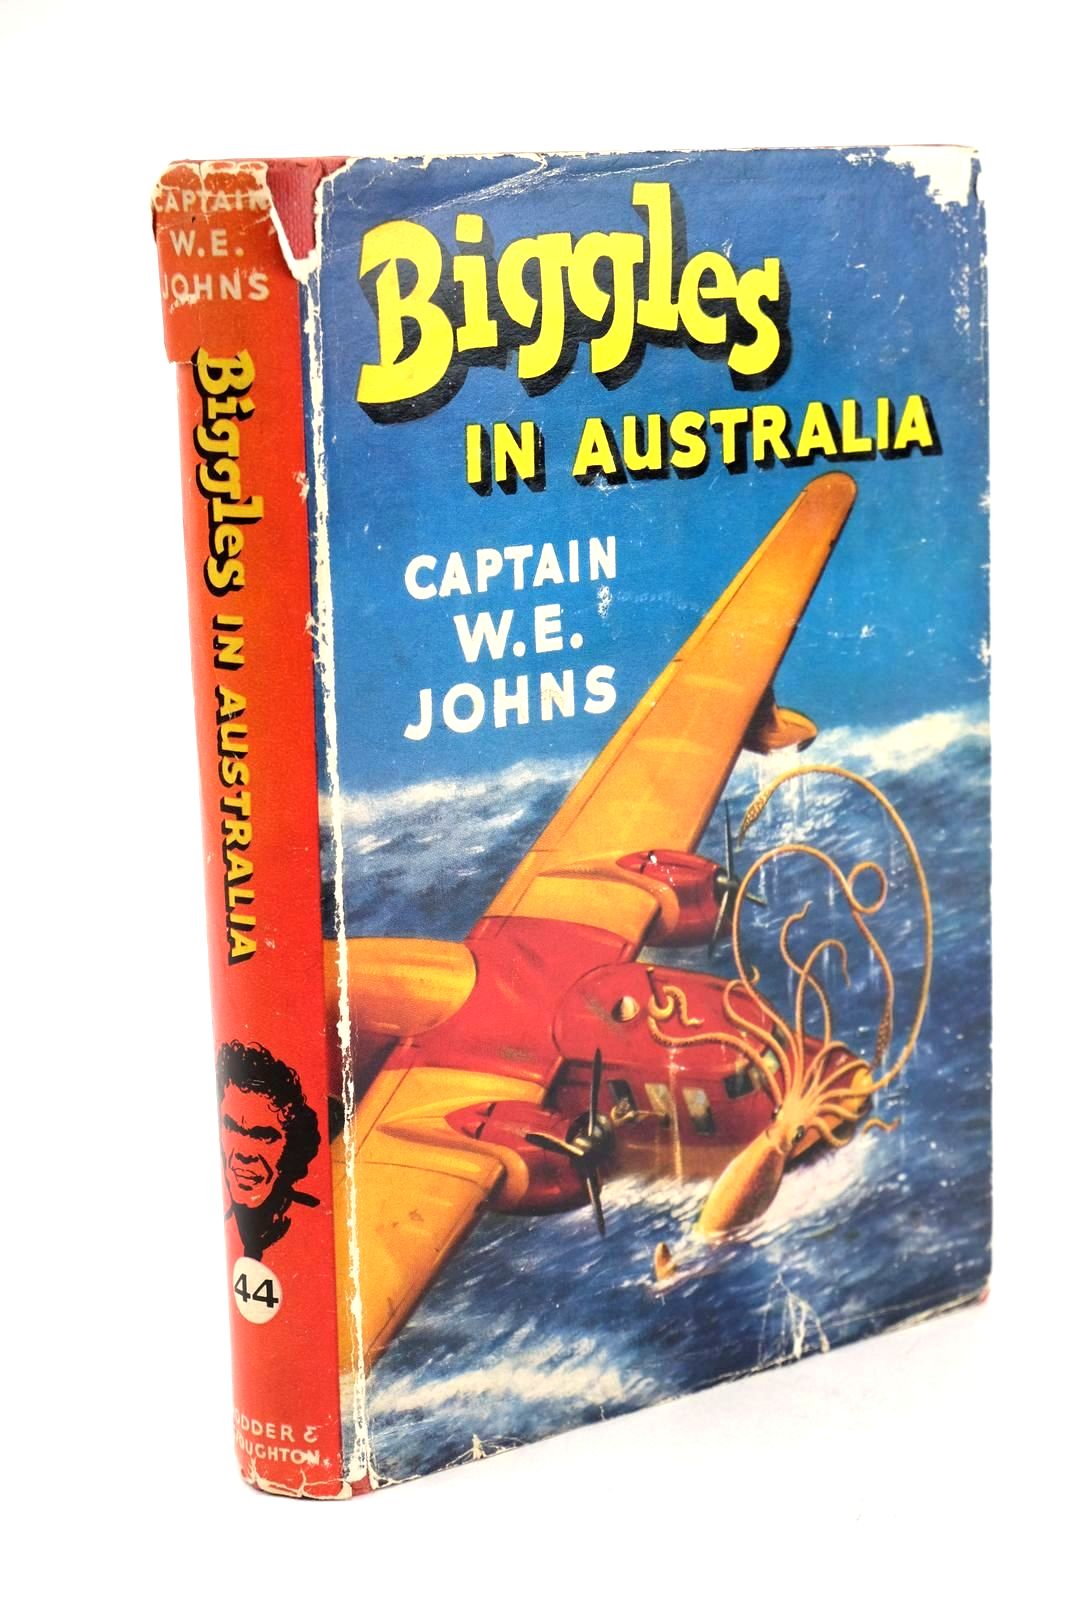 Photo of BIGGLES IN AUSTRALIA written by Johns, W.E. illustrated by Stead, Studio published by Hodder & Stoughton (STOCK CODE: 1324165)  for sale by Stella & Rose's Books